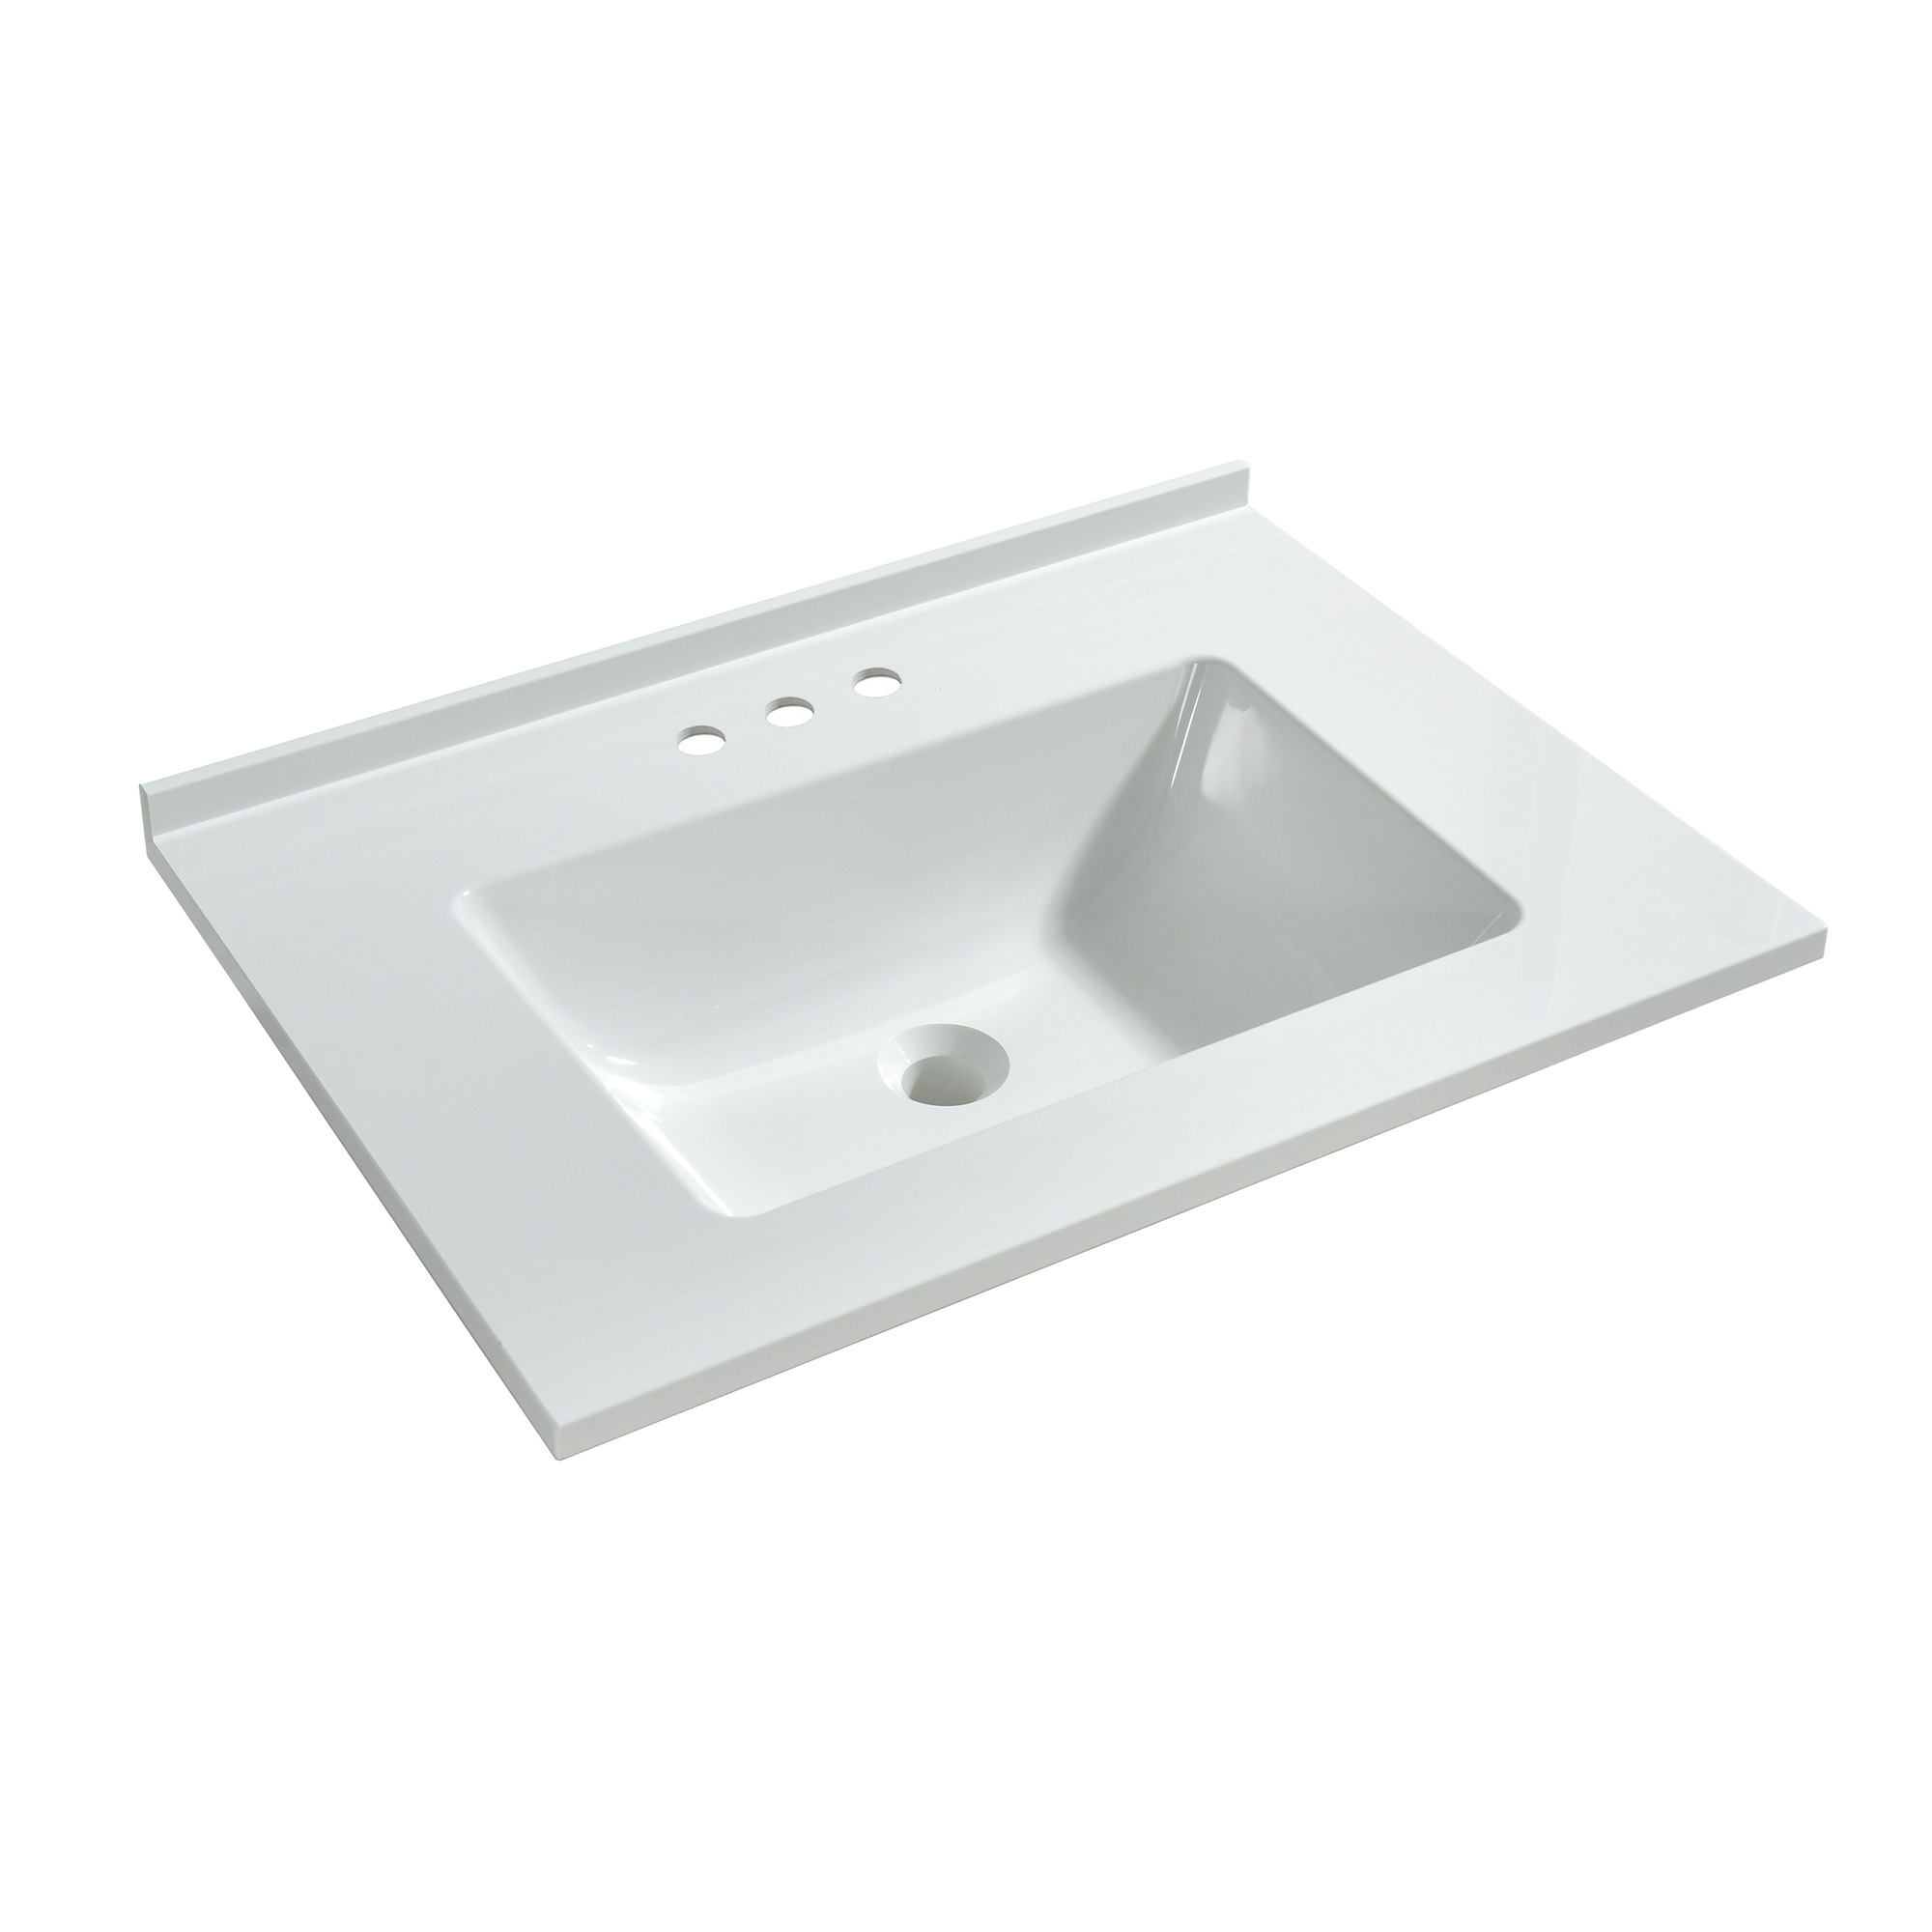 WOODBRIDGE VT2519-1000 Solid Surface Vanity Top with with Intergrated Sink and 3 Faucet Holes for 4-Inch Centerset Faucet, 25